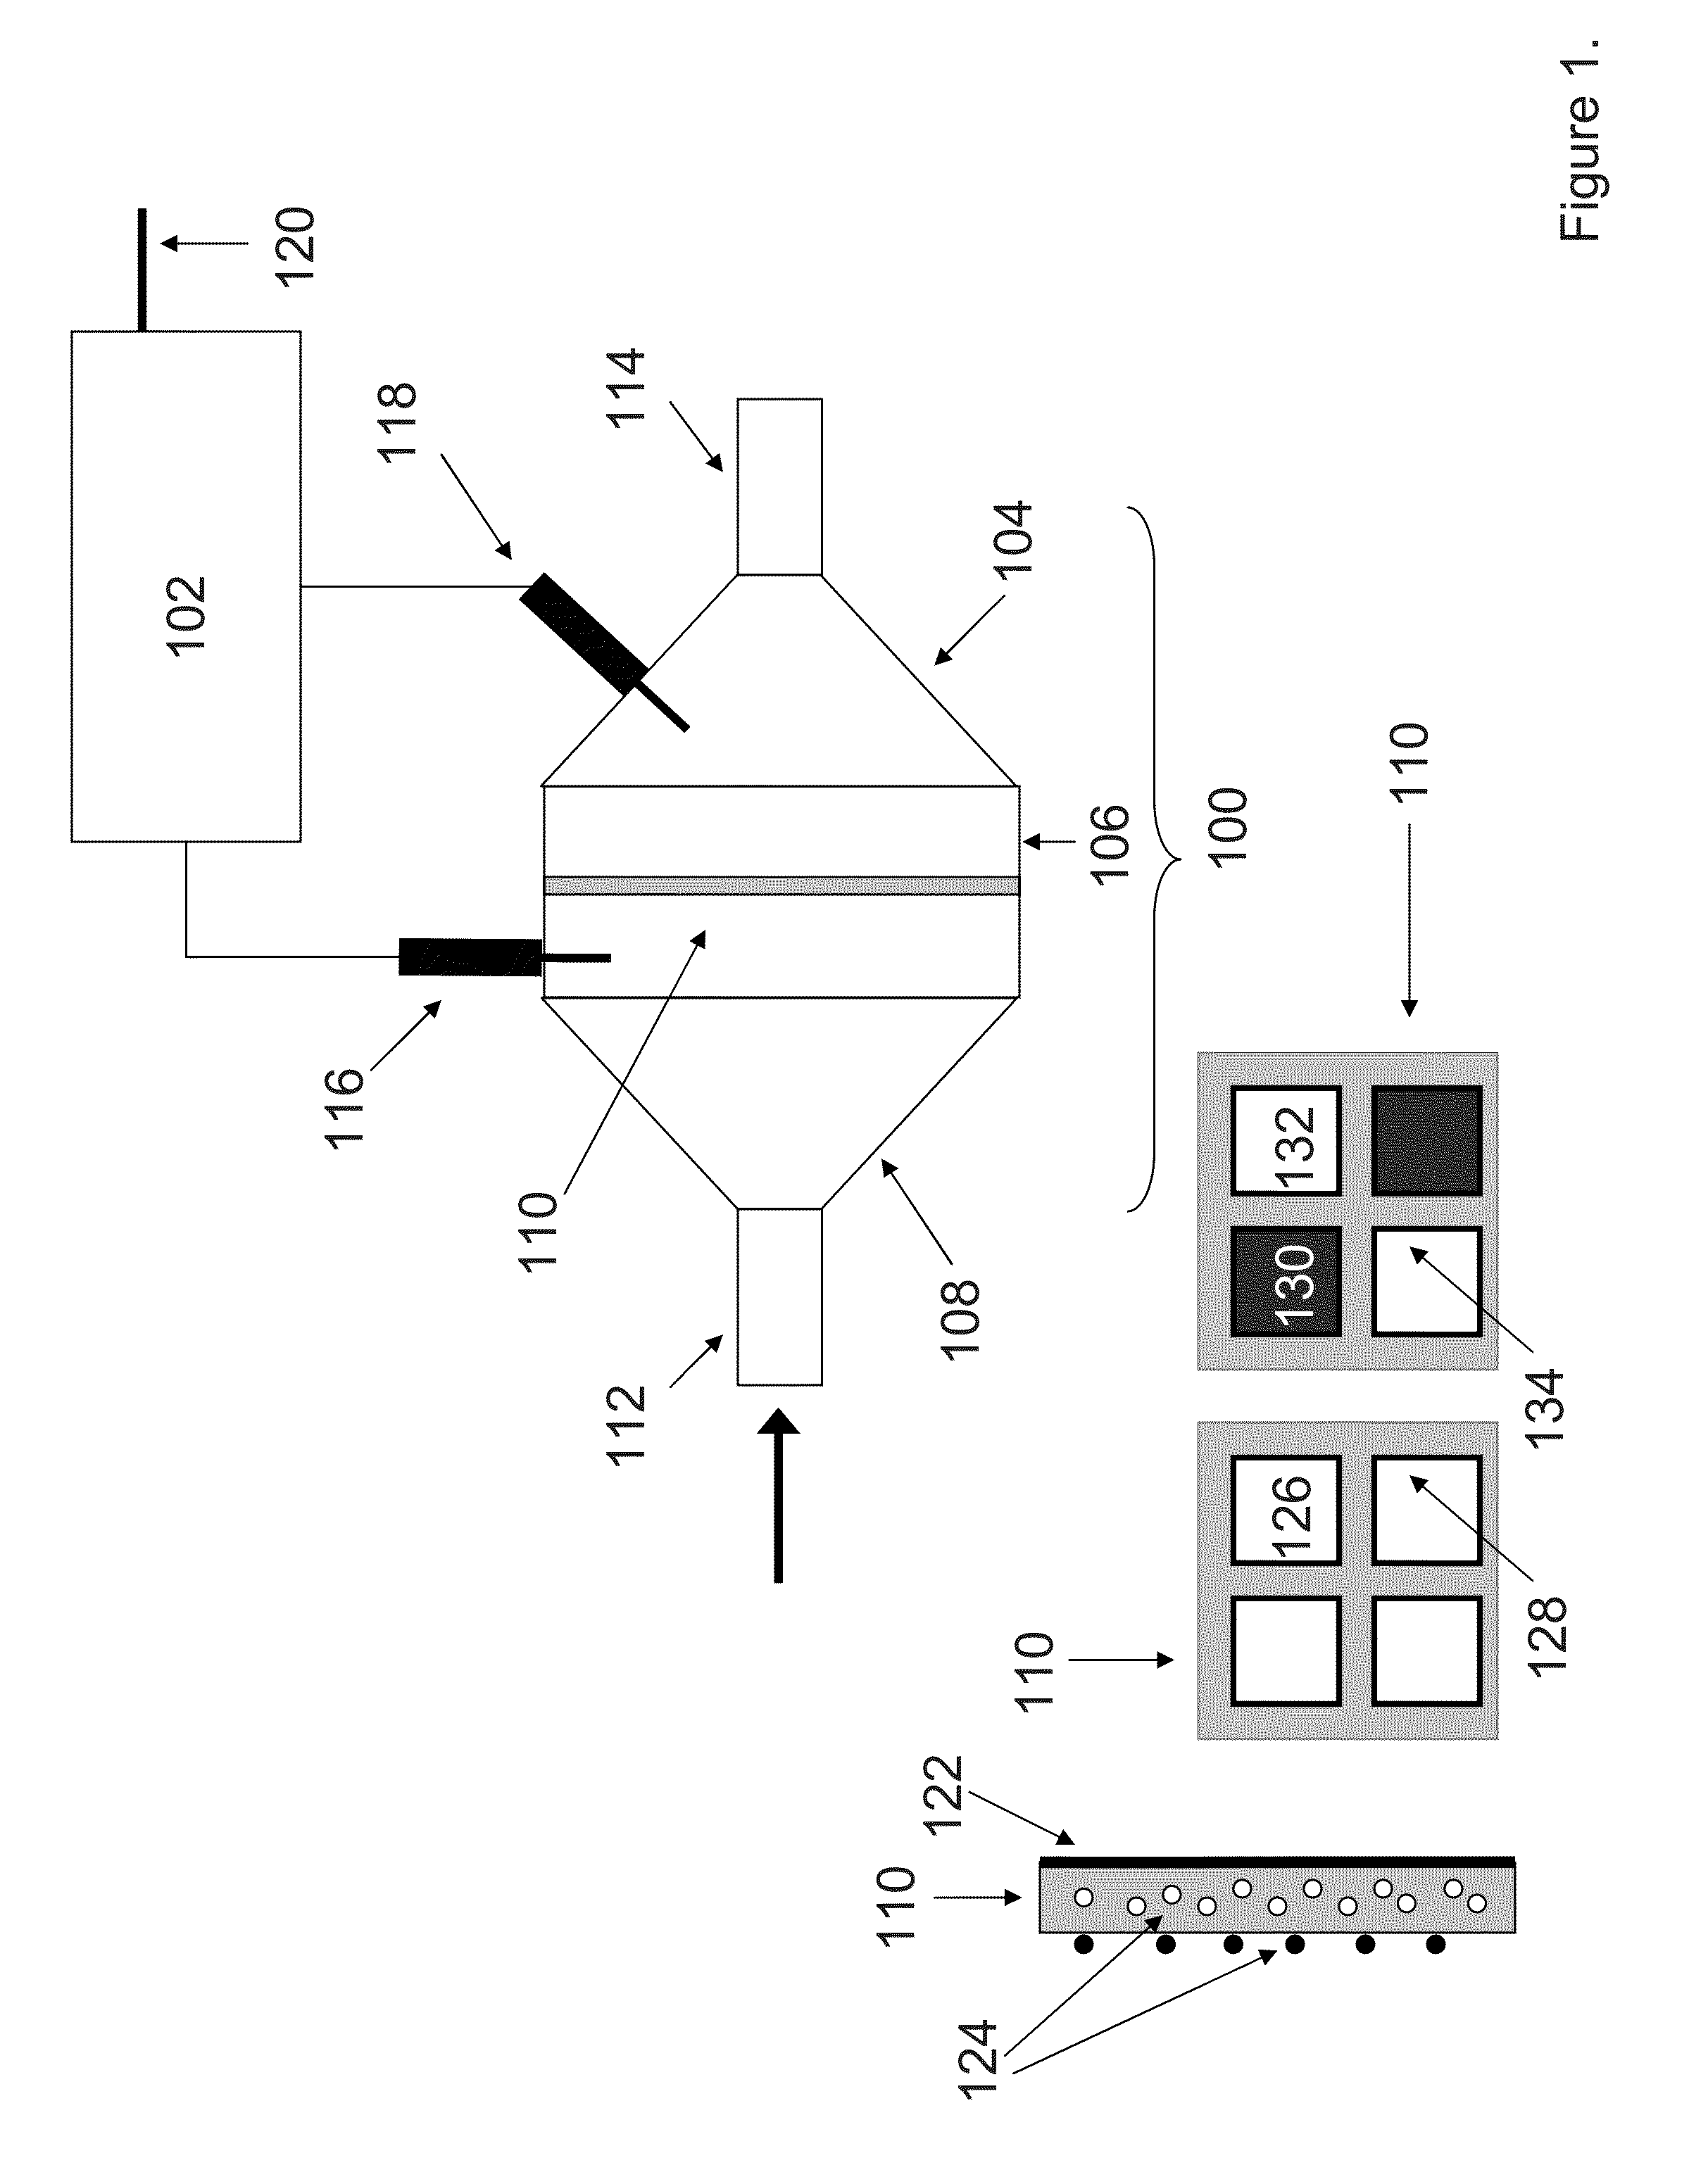 Radio Frequency State Variable Measurement System And Method